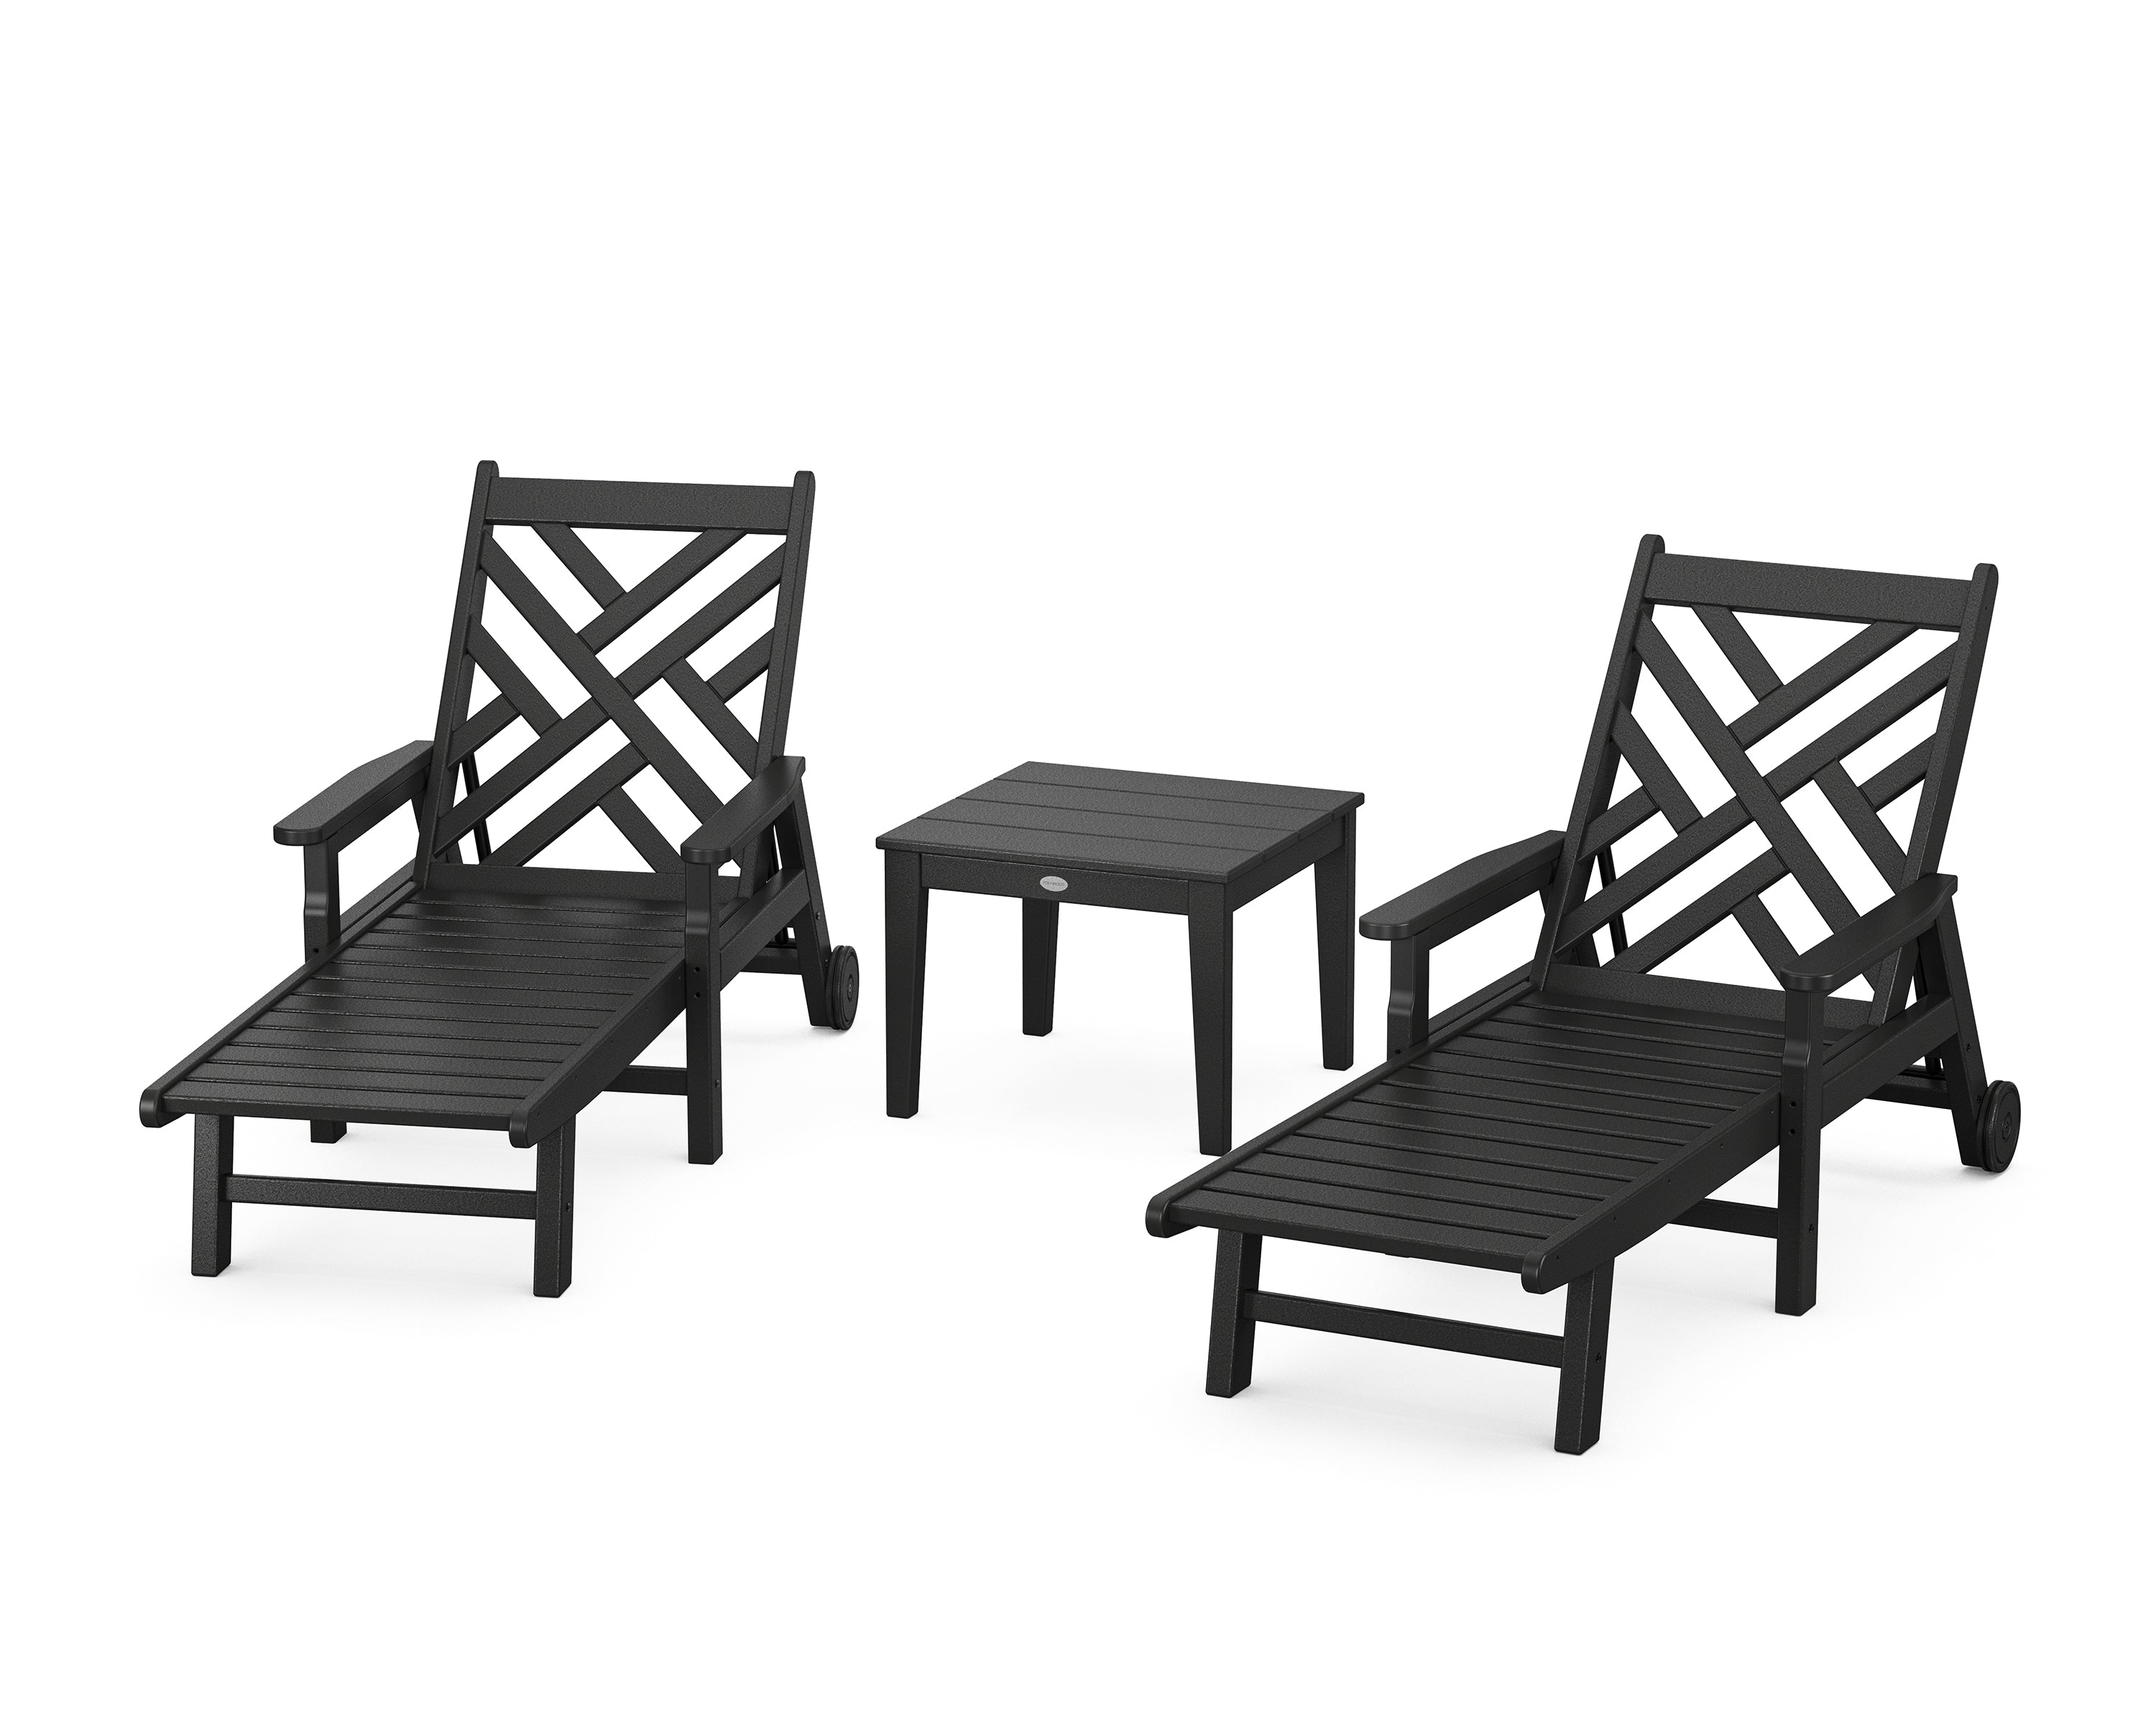 POLYWOOD Chippendale 3-Piece Chaise Set with Arms and Wheels in Black